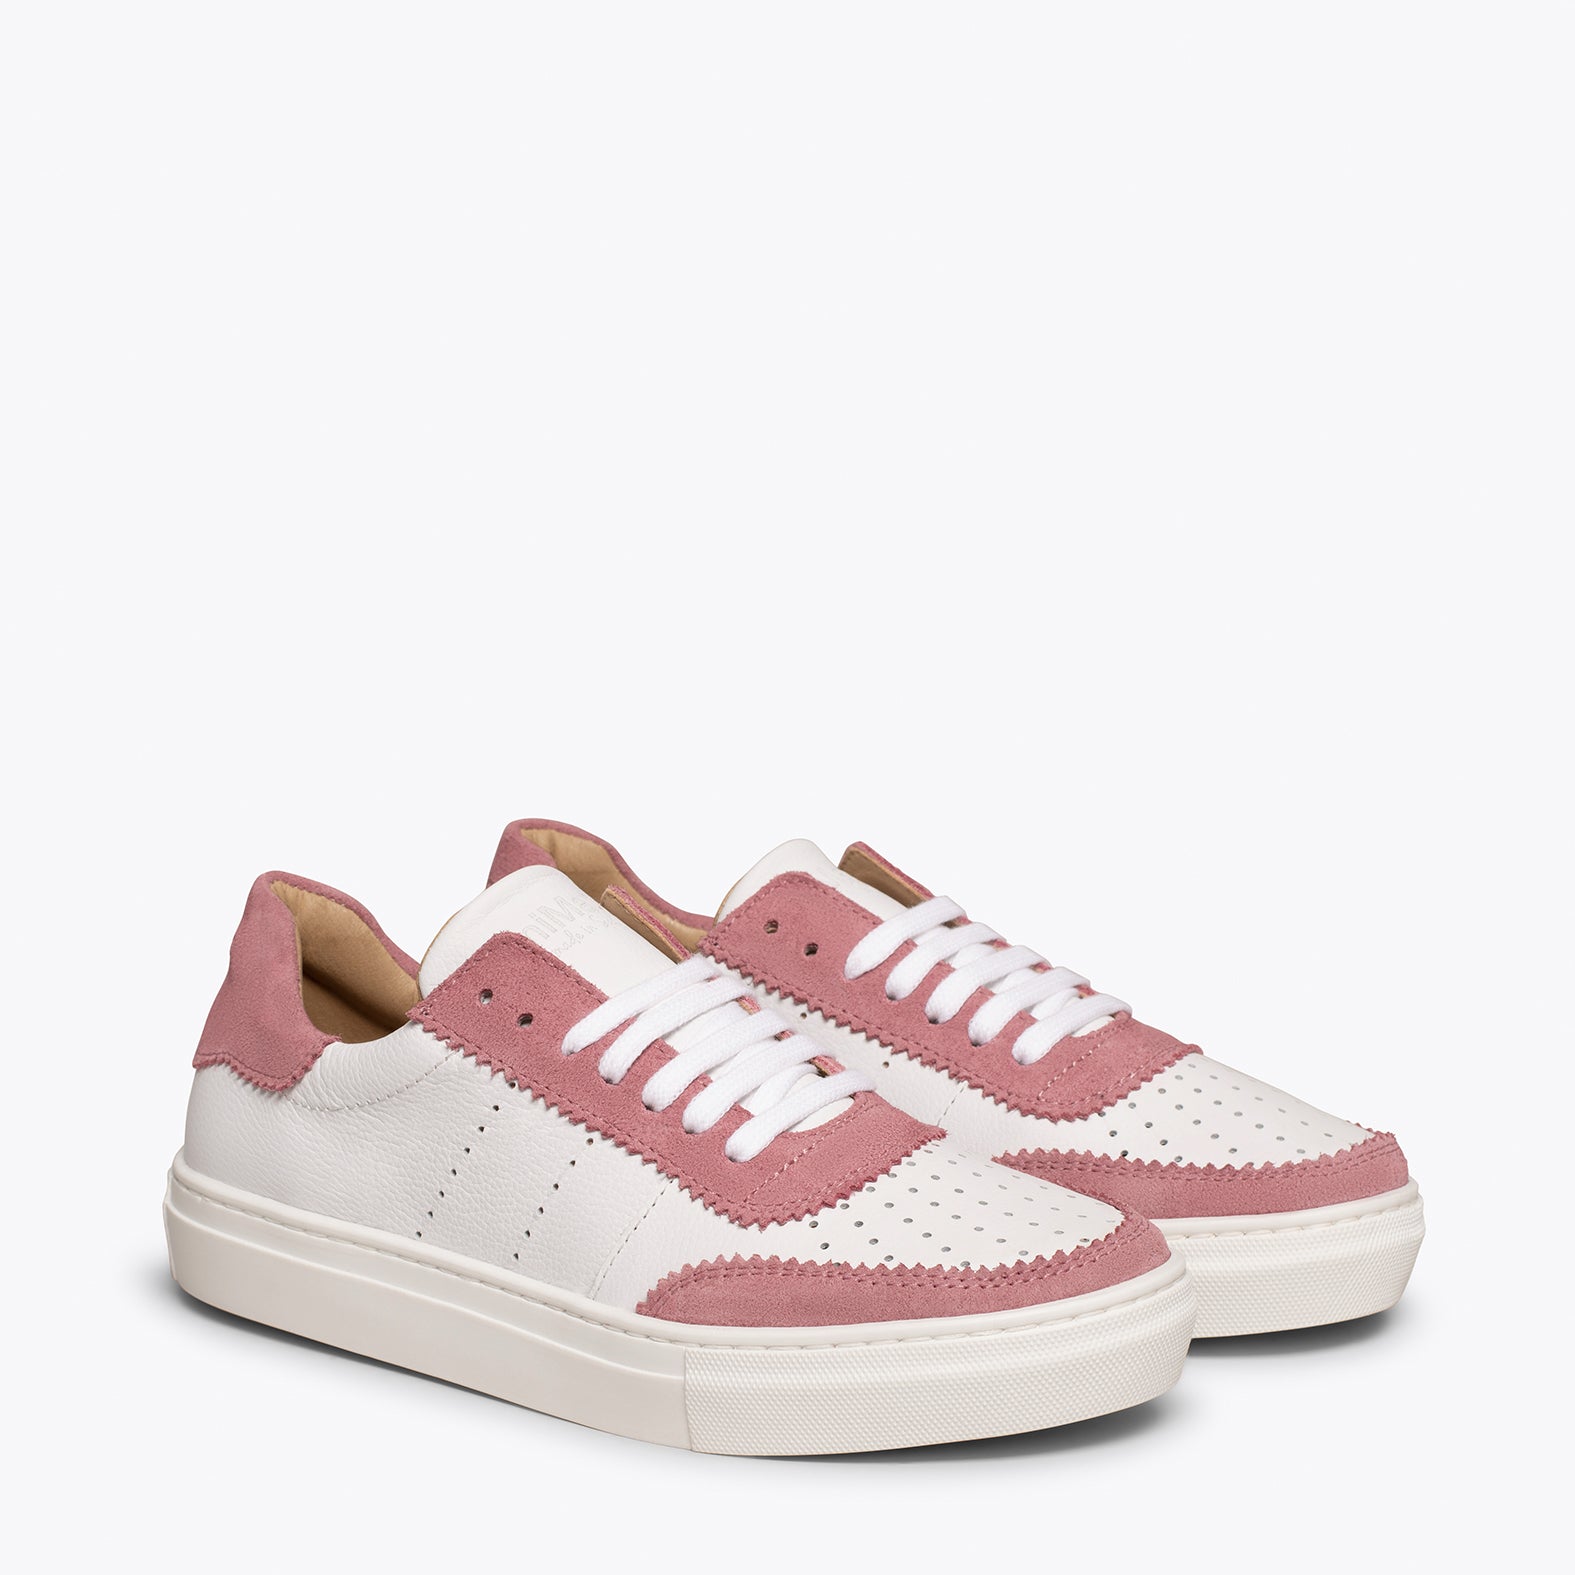 ROLLER - Sneakers pour femme blanches feston ROSE